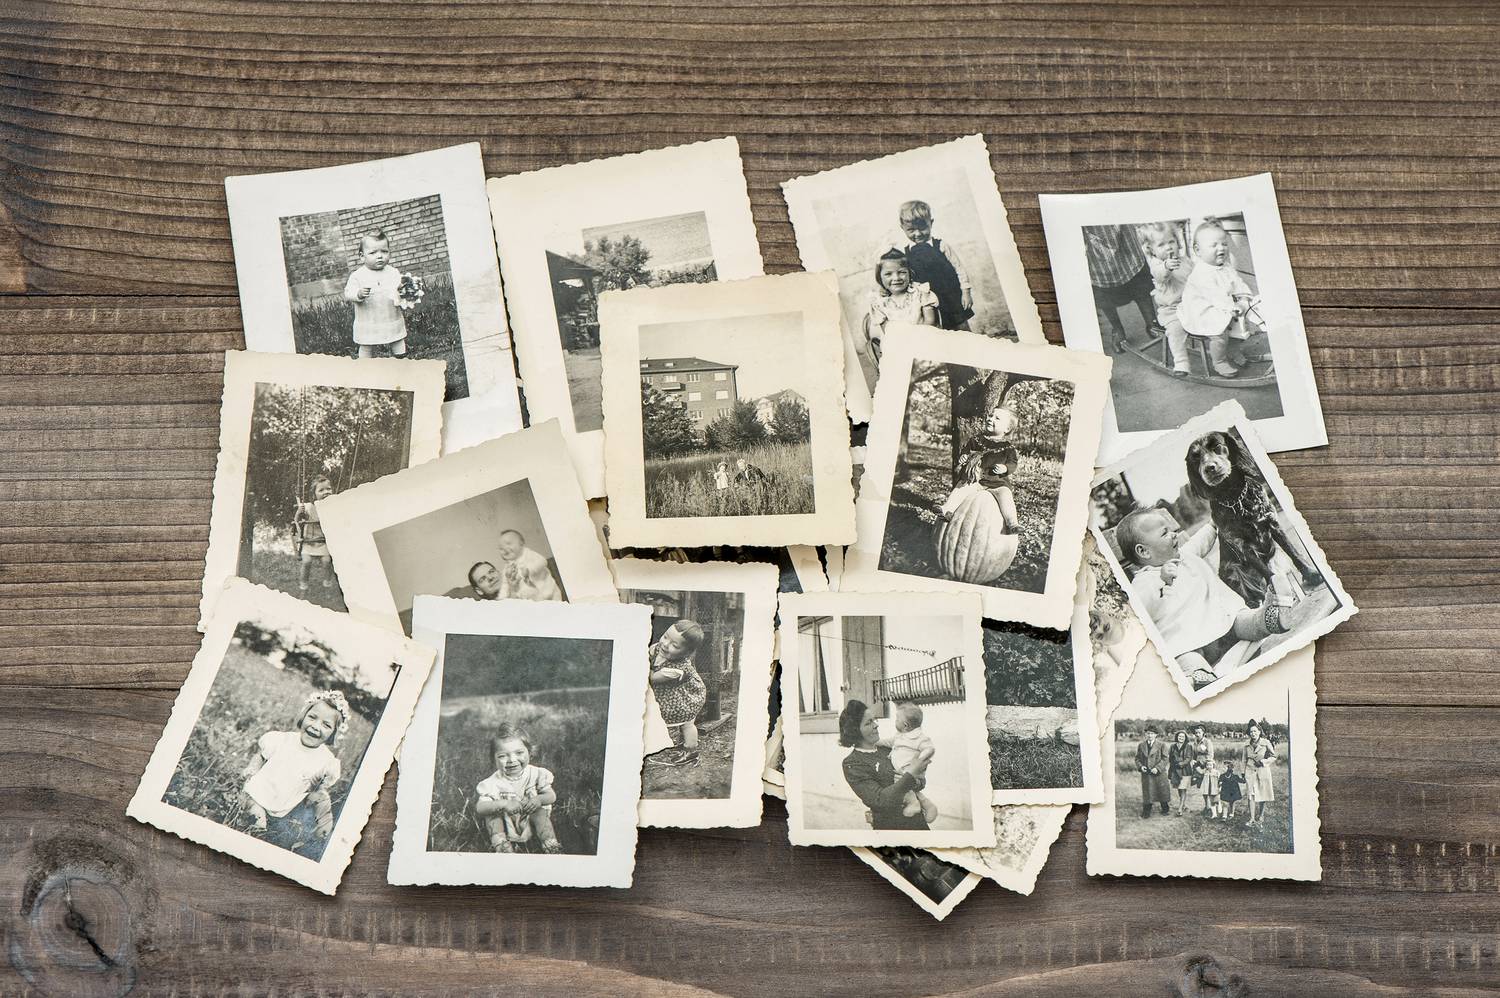 photographing family history as an idea for photojournalism